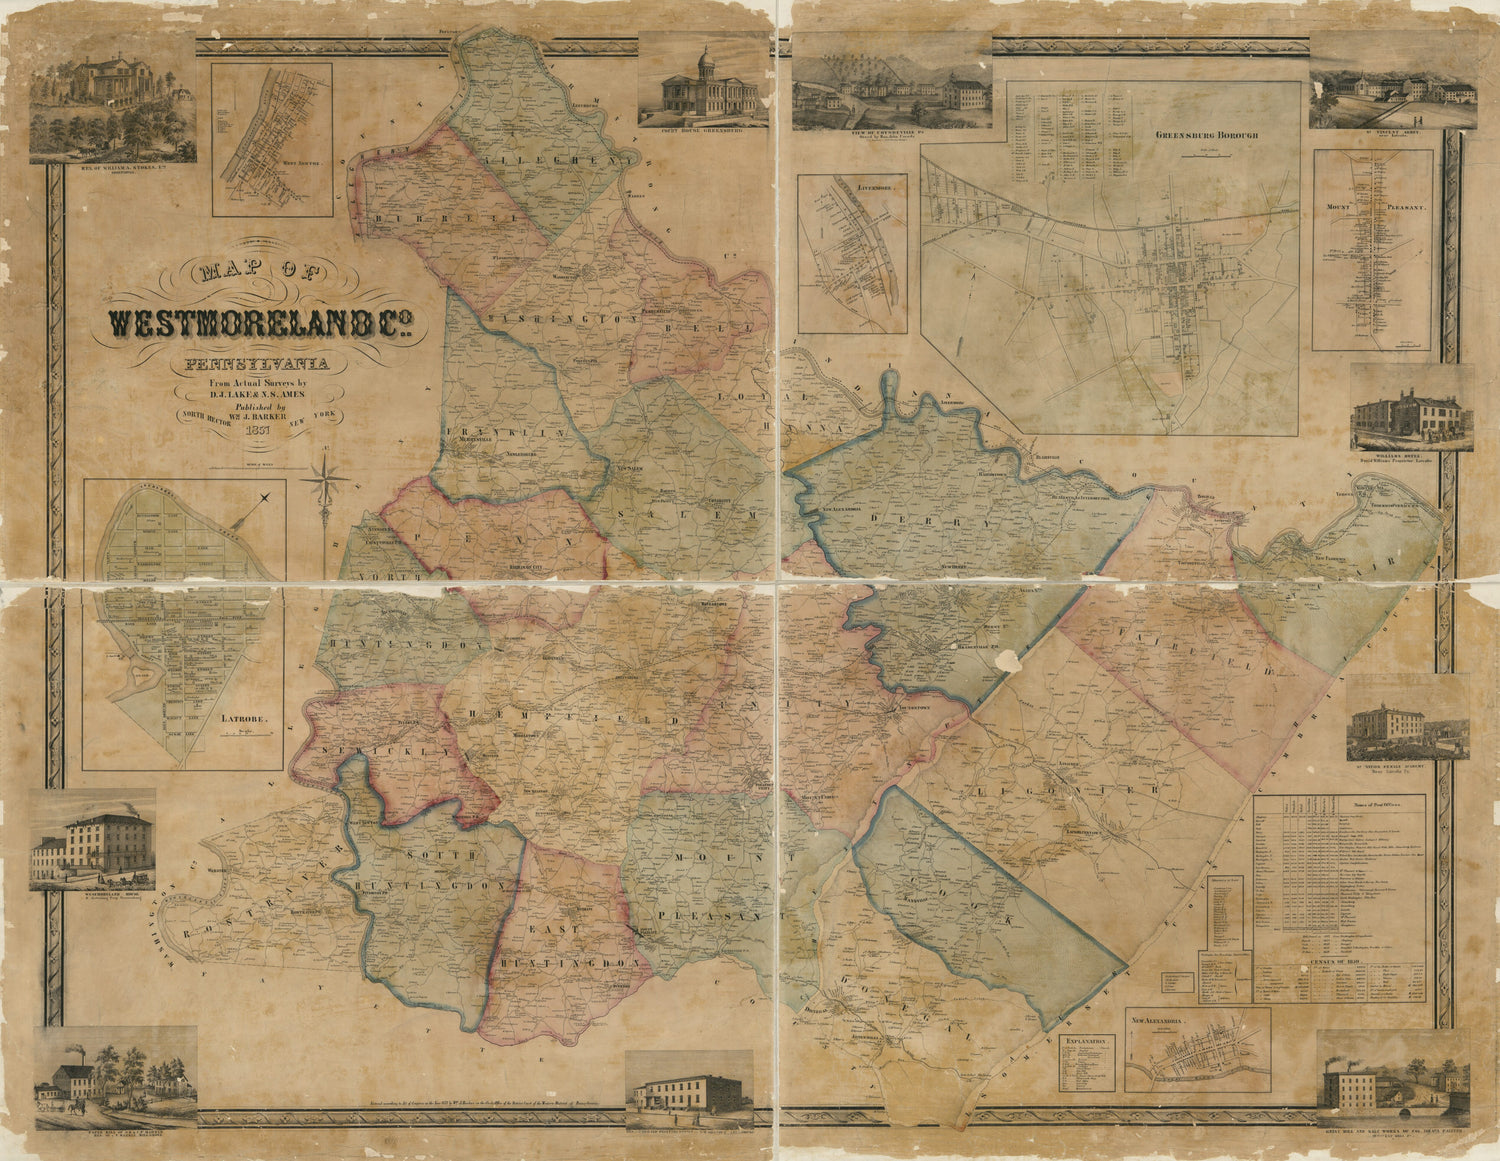 This old map of Map of Westmoreland Co., Pennsylvania : from Actual Surveys from 1857 was created by N. S. Ames, Wm. J. (William J.) Barker, D. J. Lake in 1857